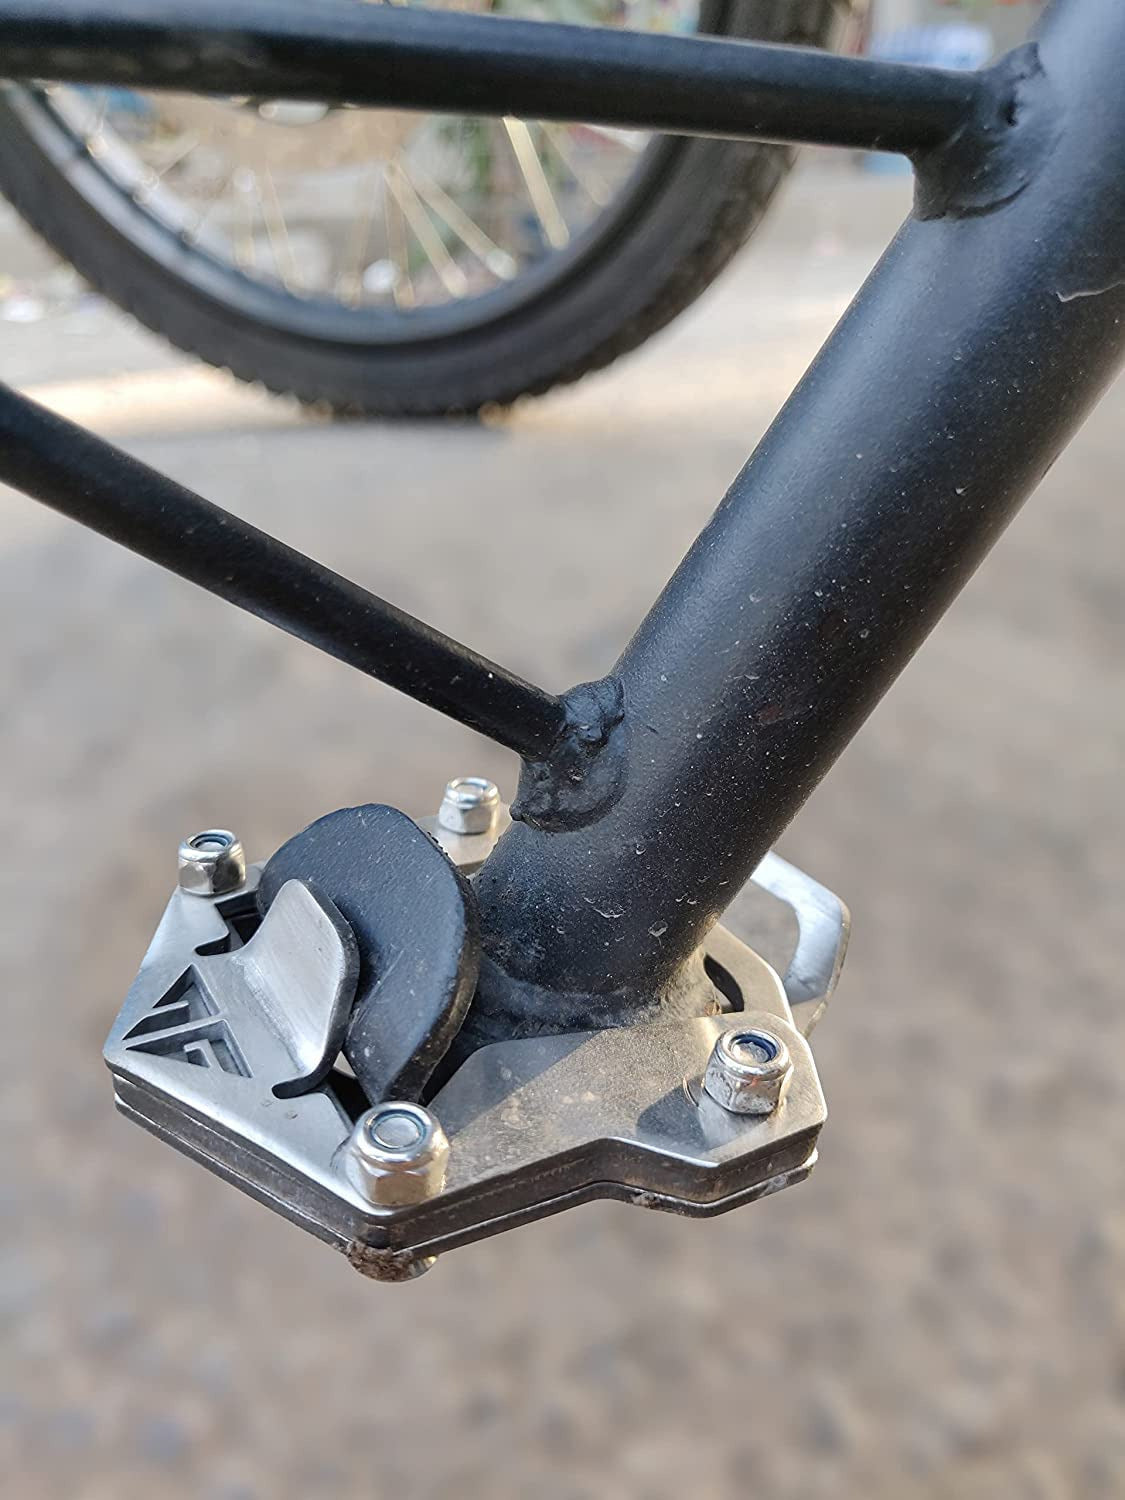 AutoPowerz Brushed Stainless Steel Side Stand Extender for Royal Enfield Himalayan Bike Side Stand